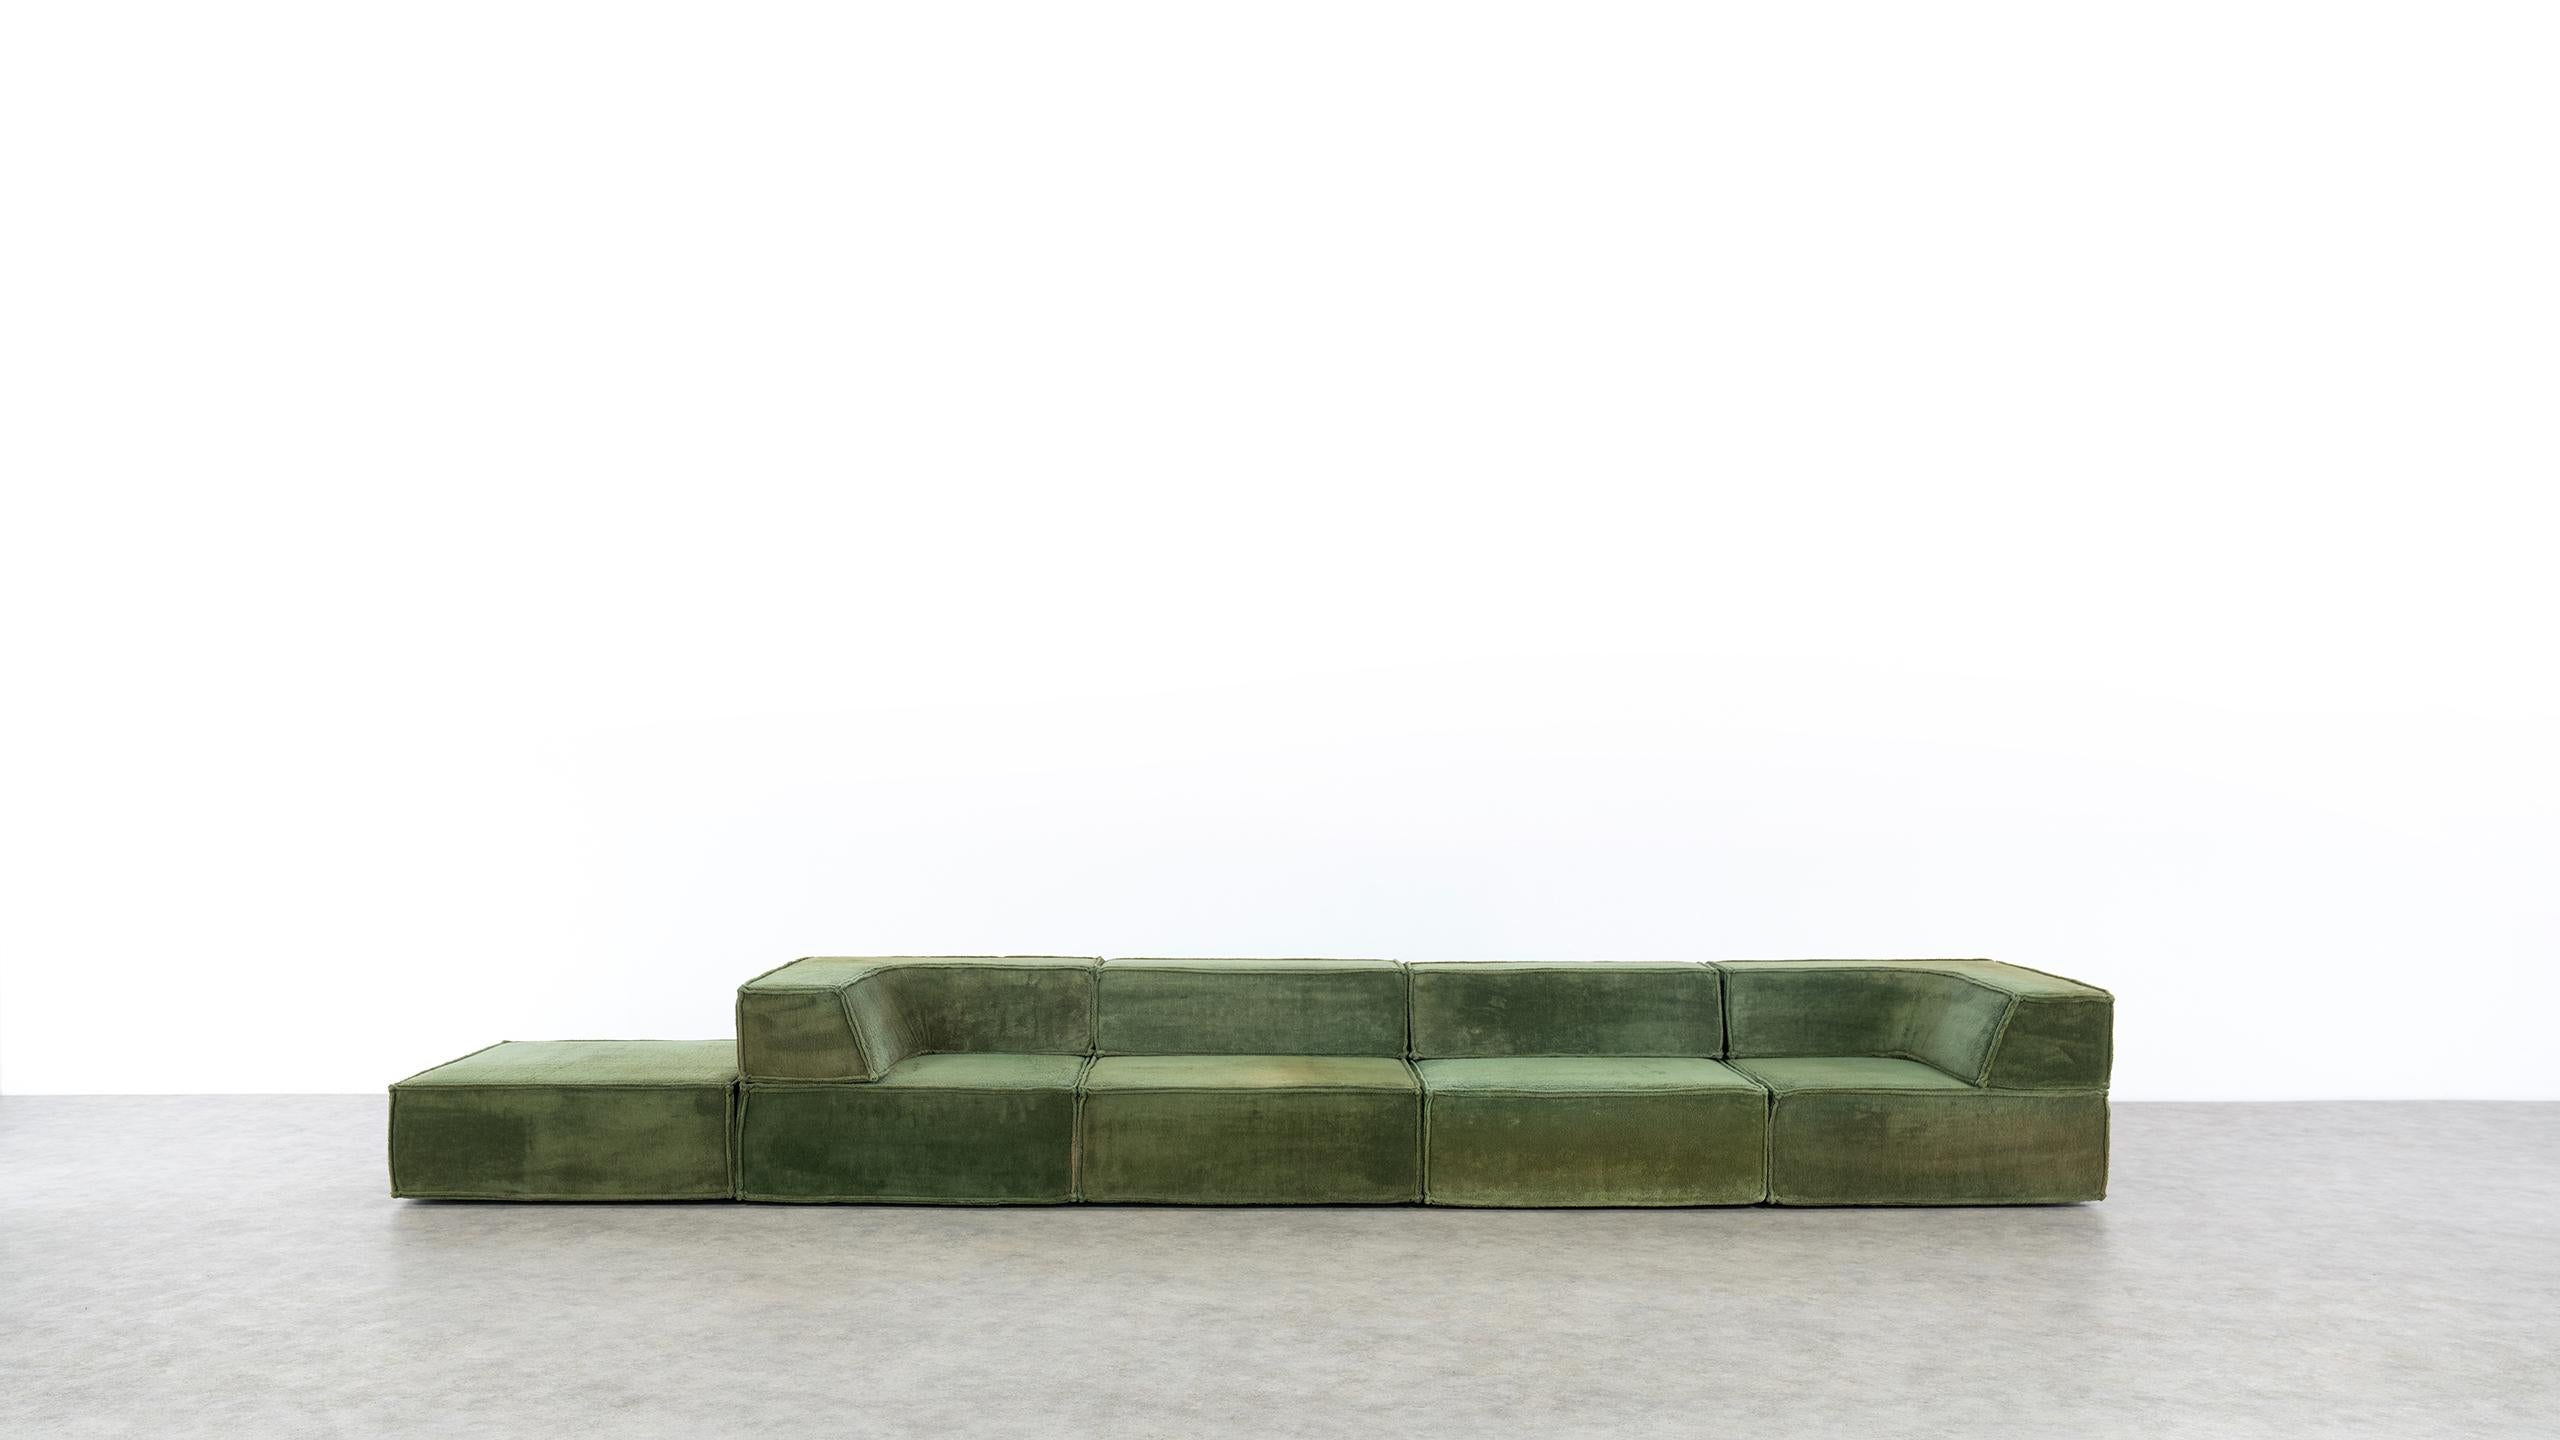 COR Trio Modular Sofa, Giant Landscape in Green, 1972 by Team Form AG, Swiss 4